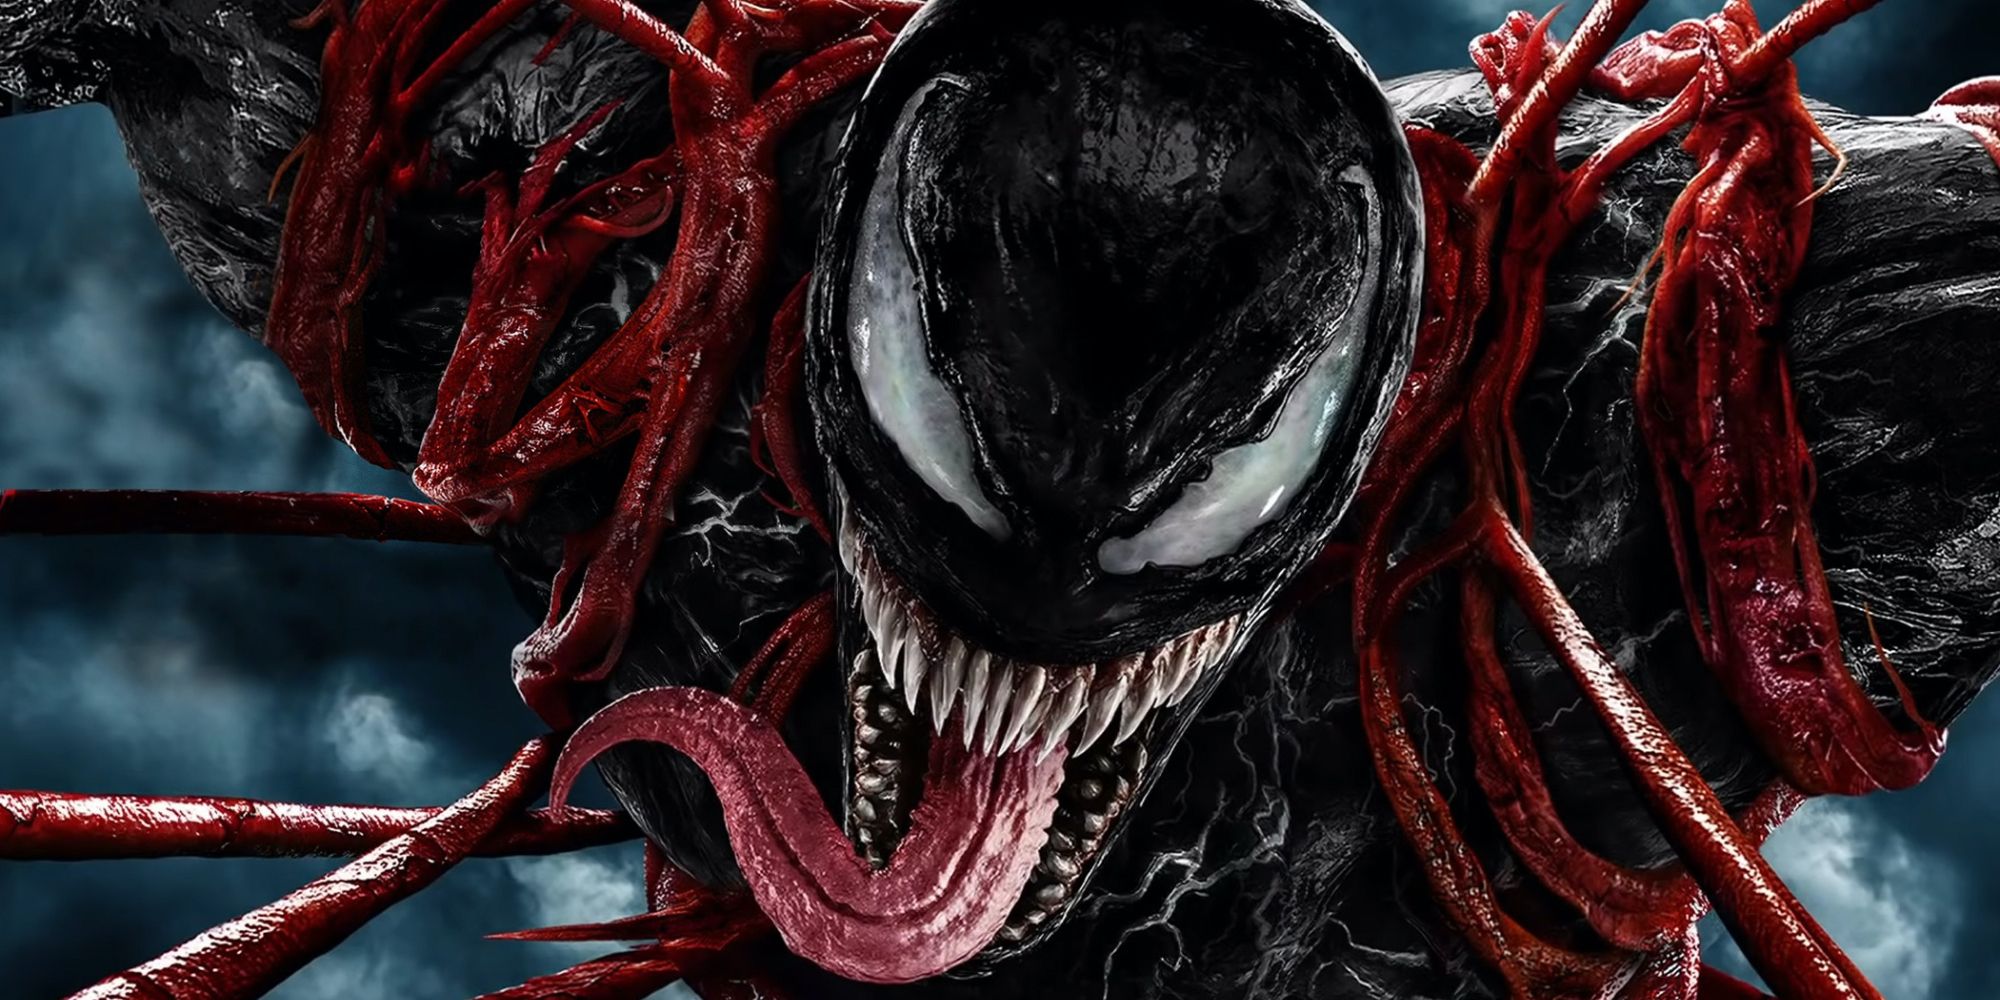 Venom-Let-There-Be-Carnage-Textless-Poster-Image